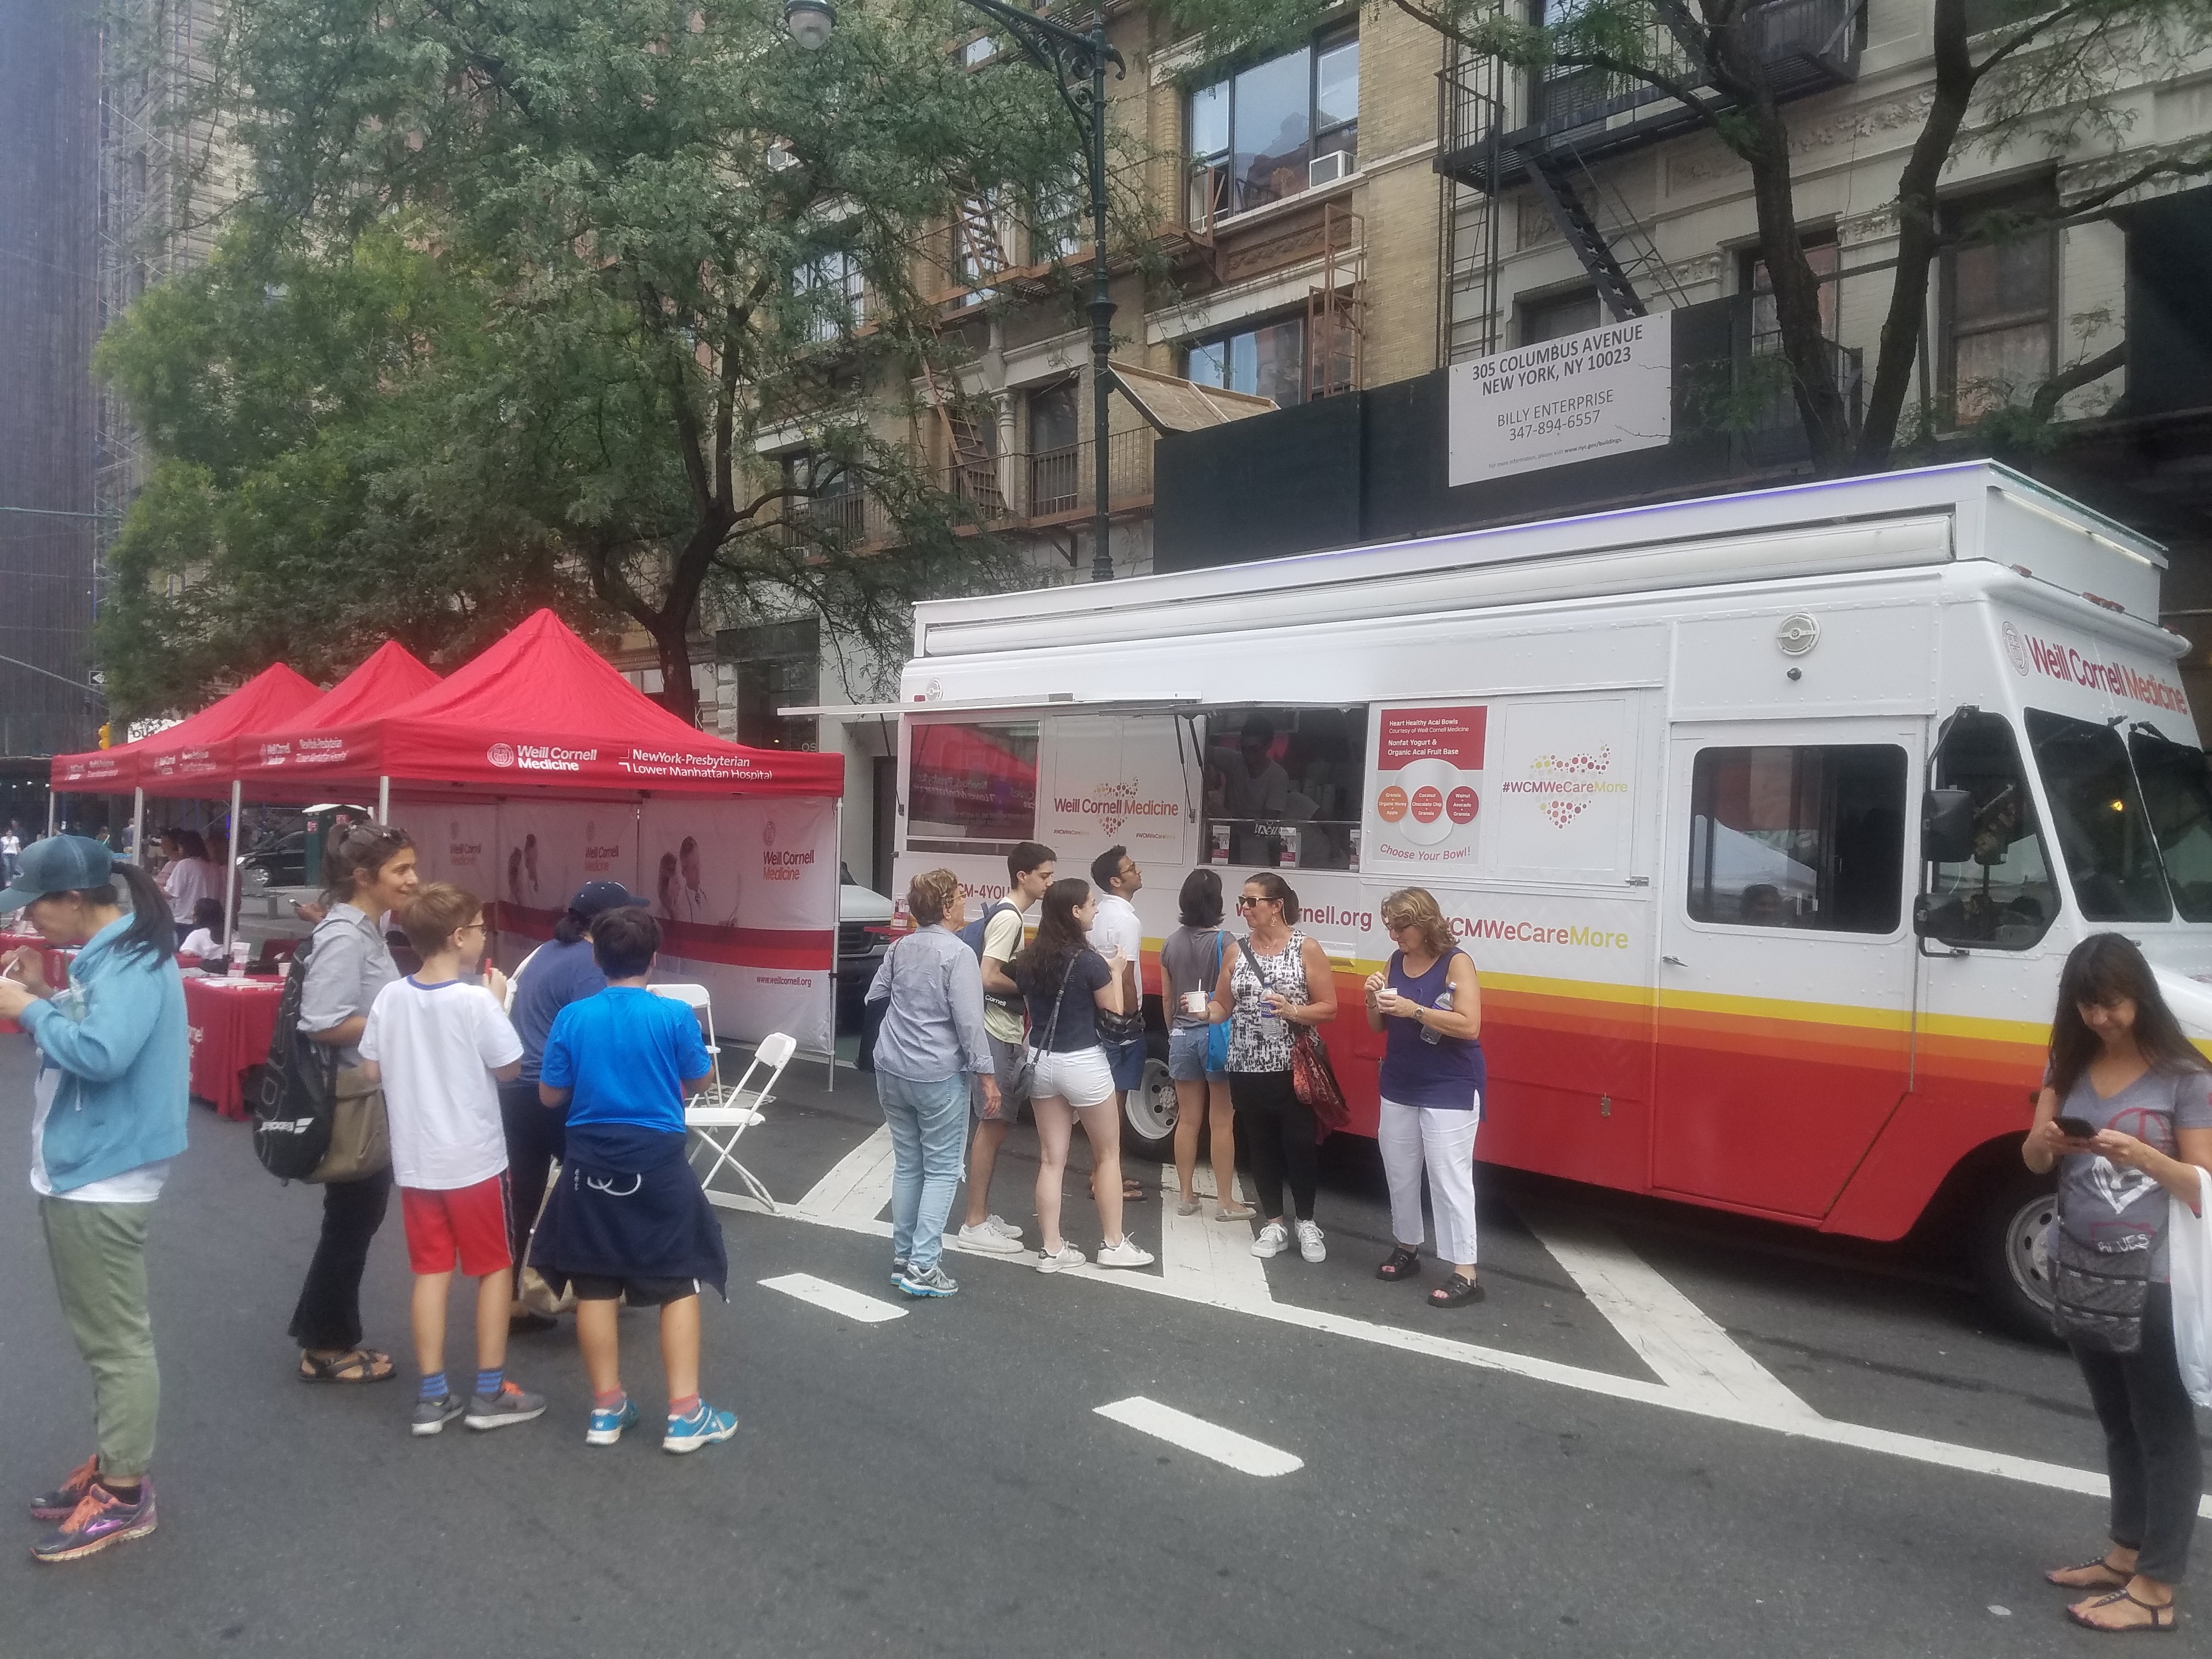 Columbus Avenue Festival attendees lined up for healthy snacks in front of Weill Cornell Medicine's food truck.